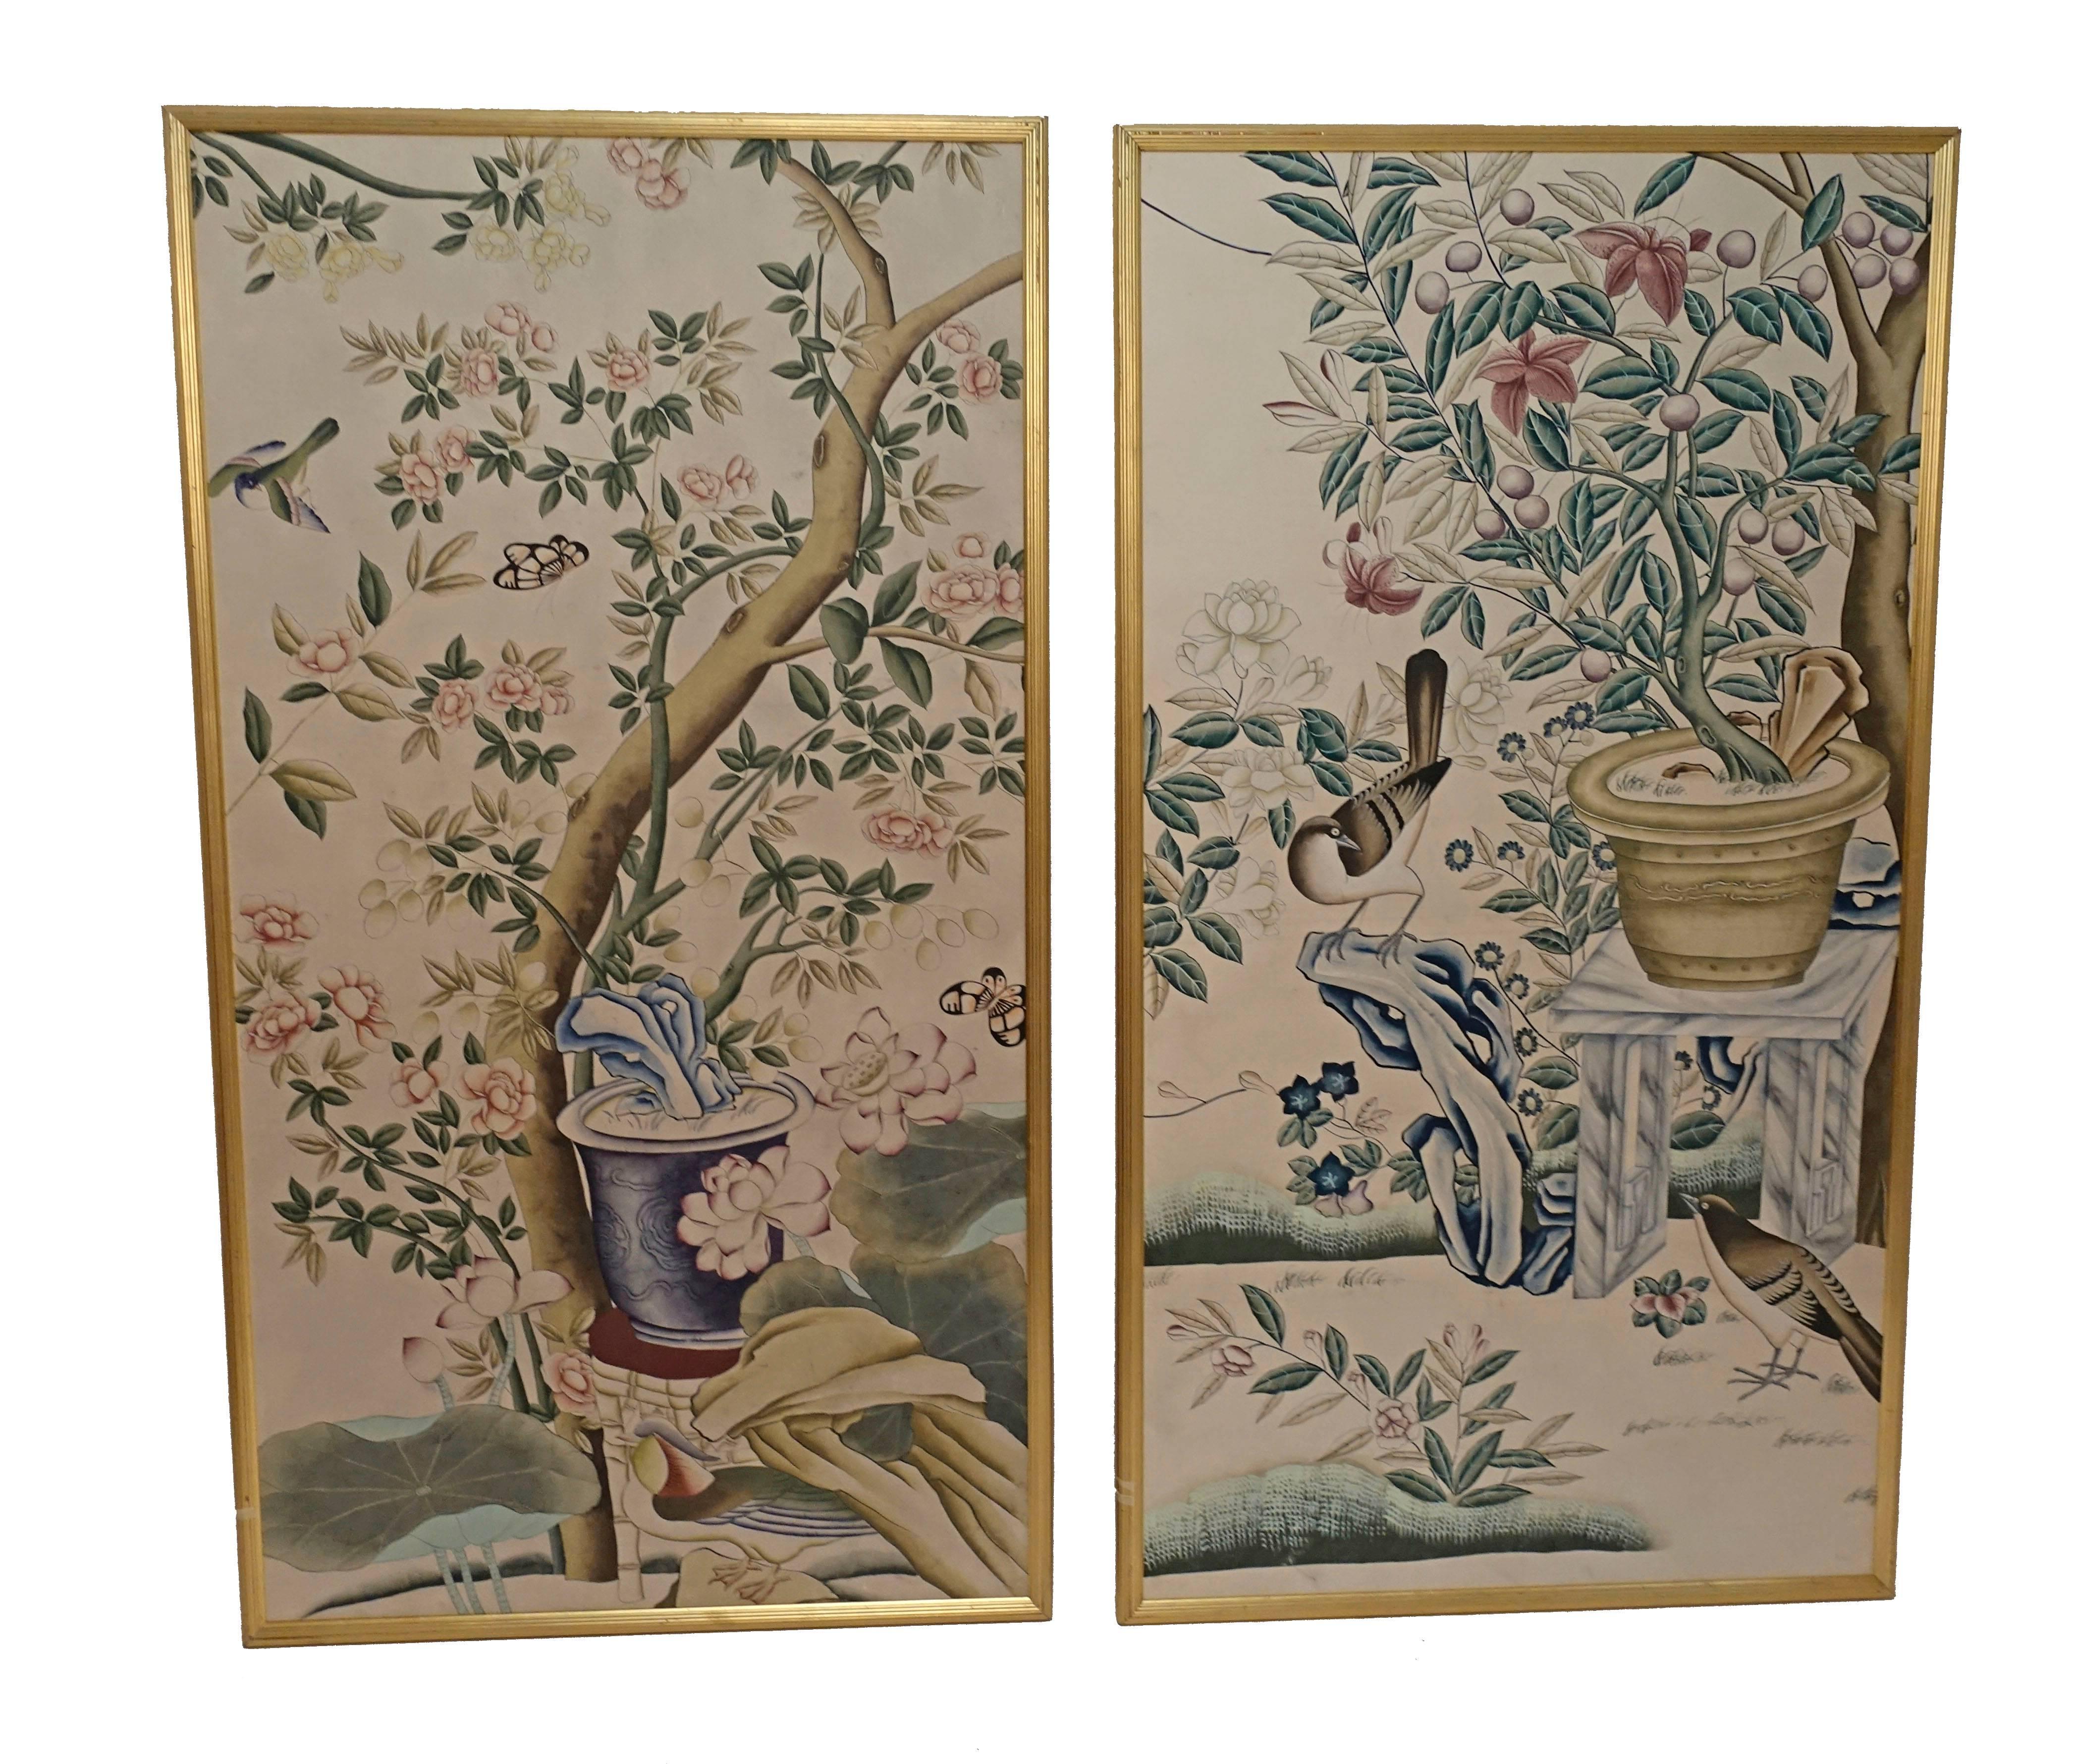 Framed wall paper panels, China, early 20th century.